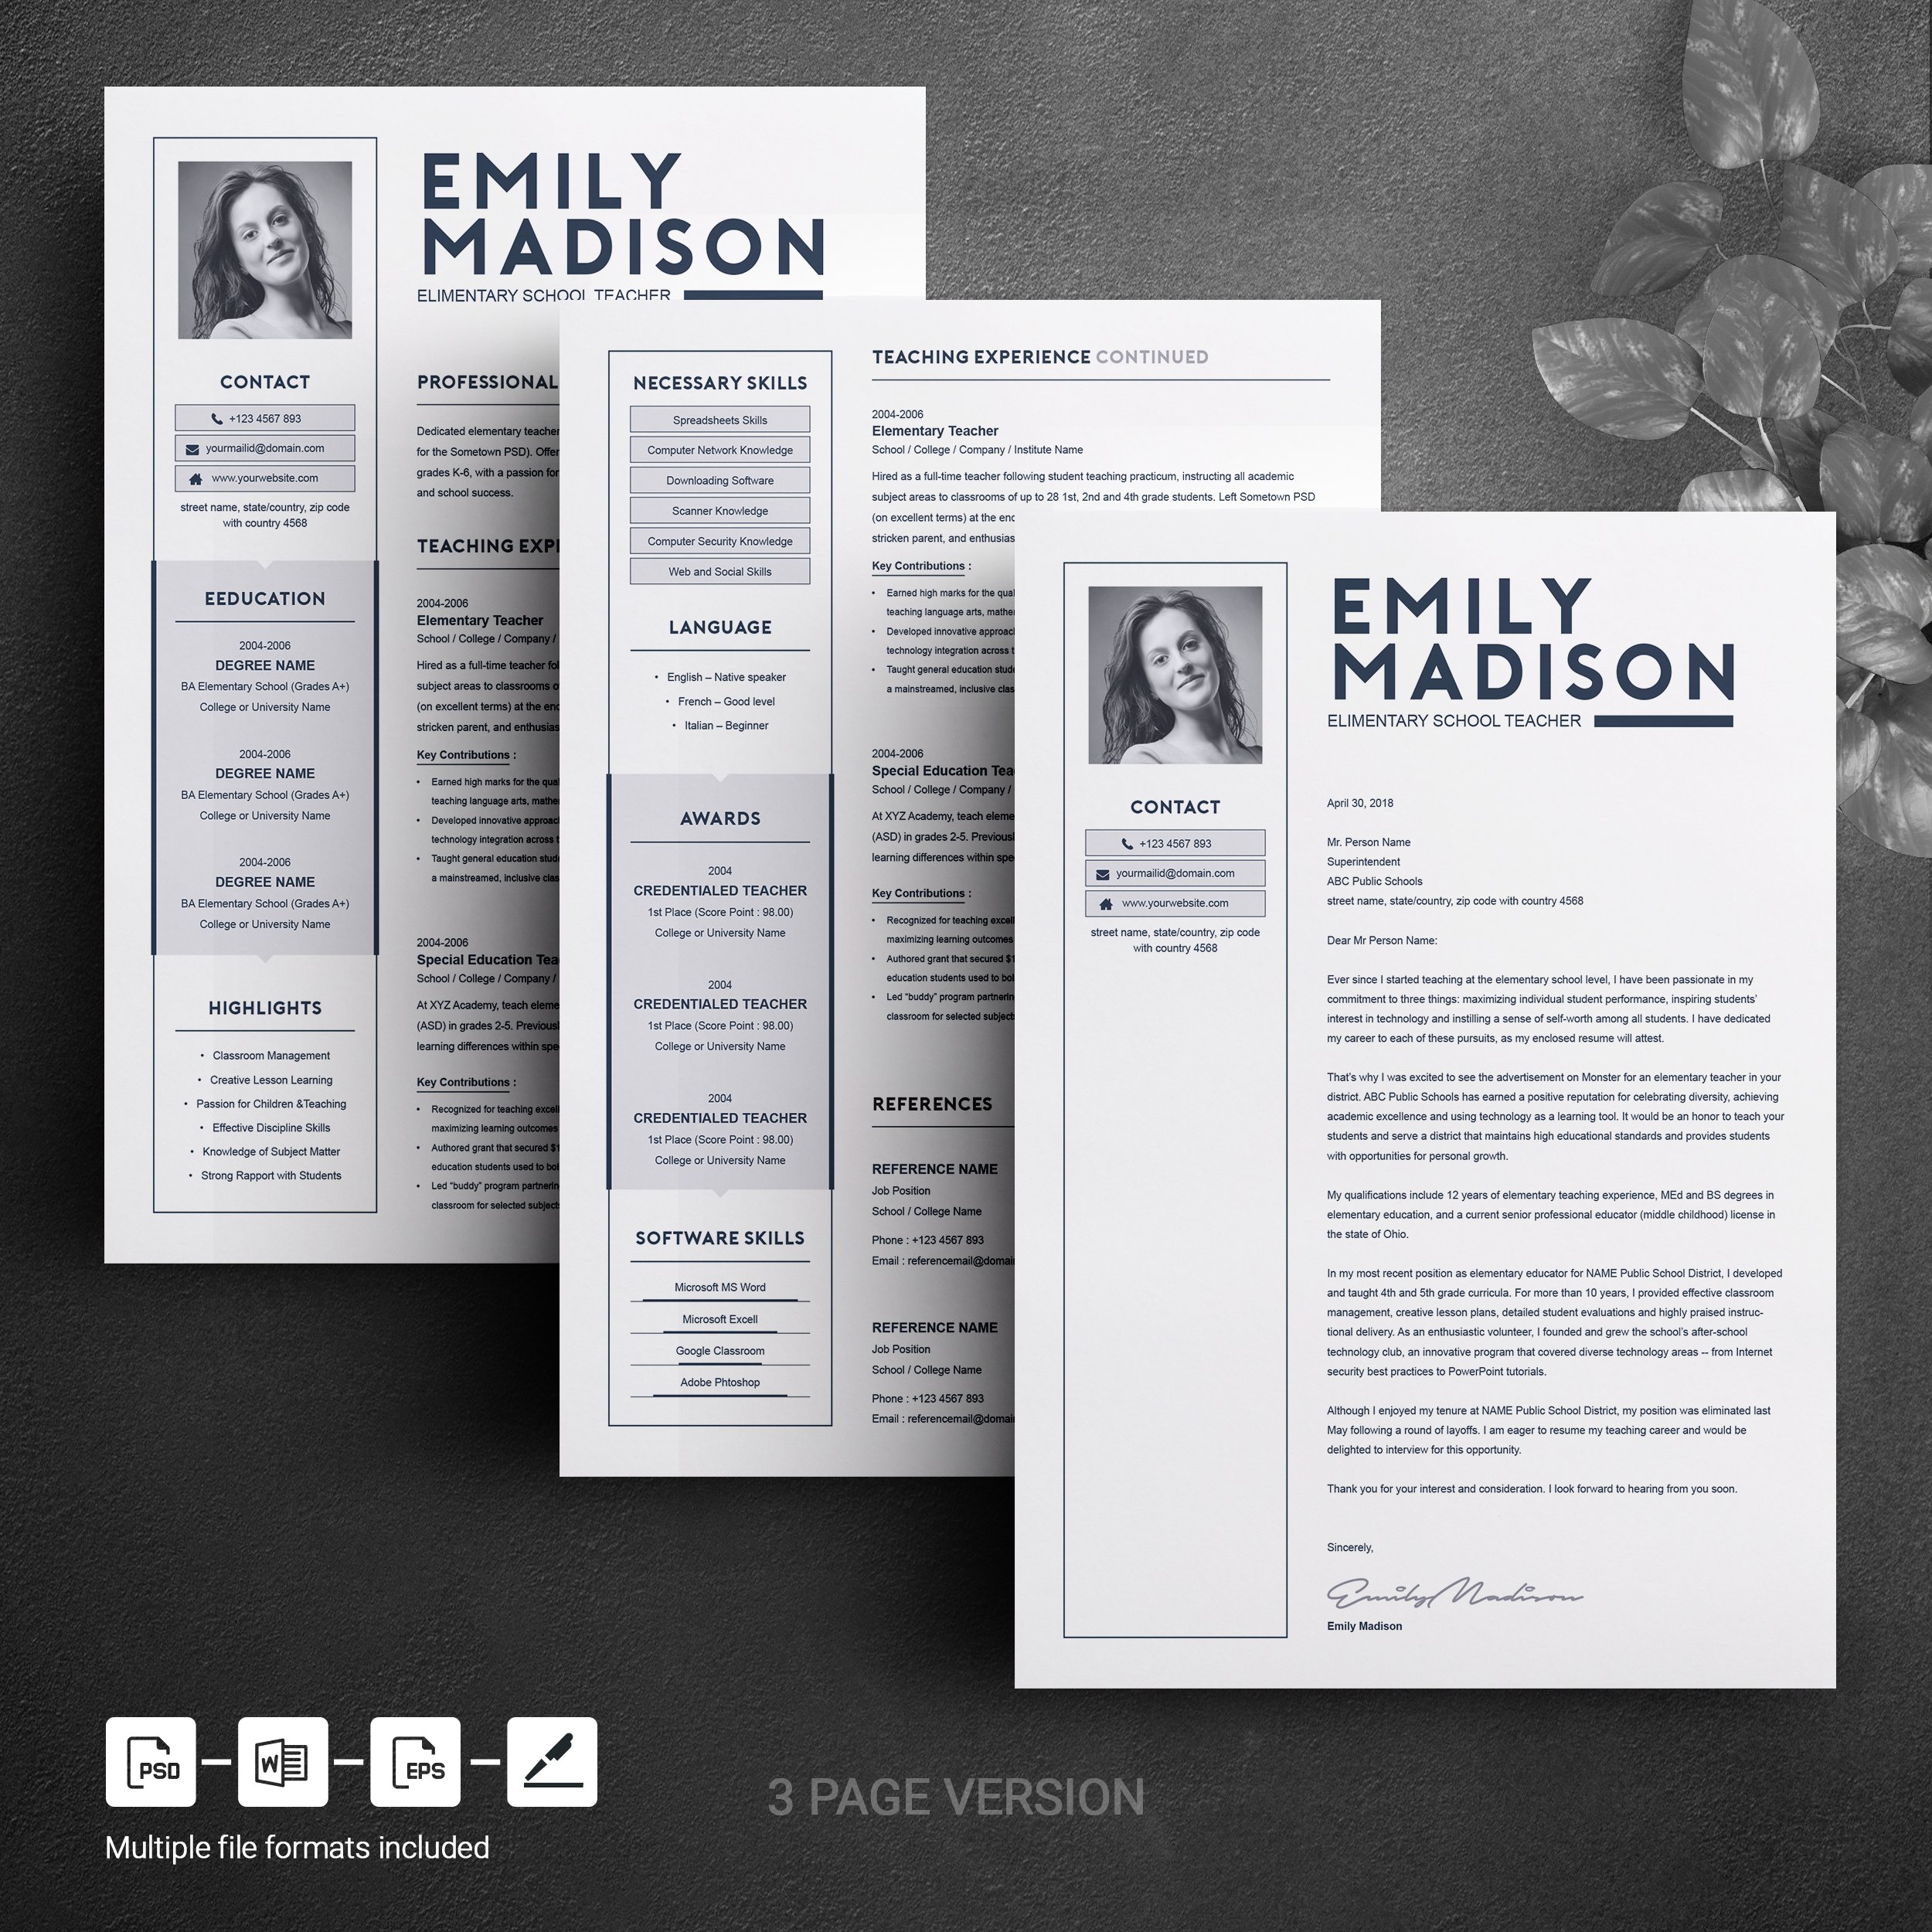 03 3 page free resume design template 38